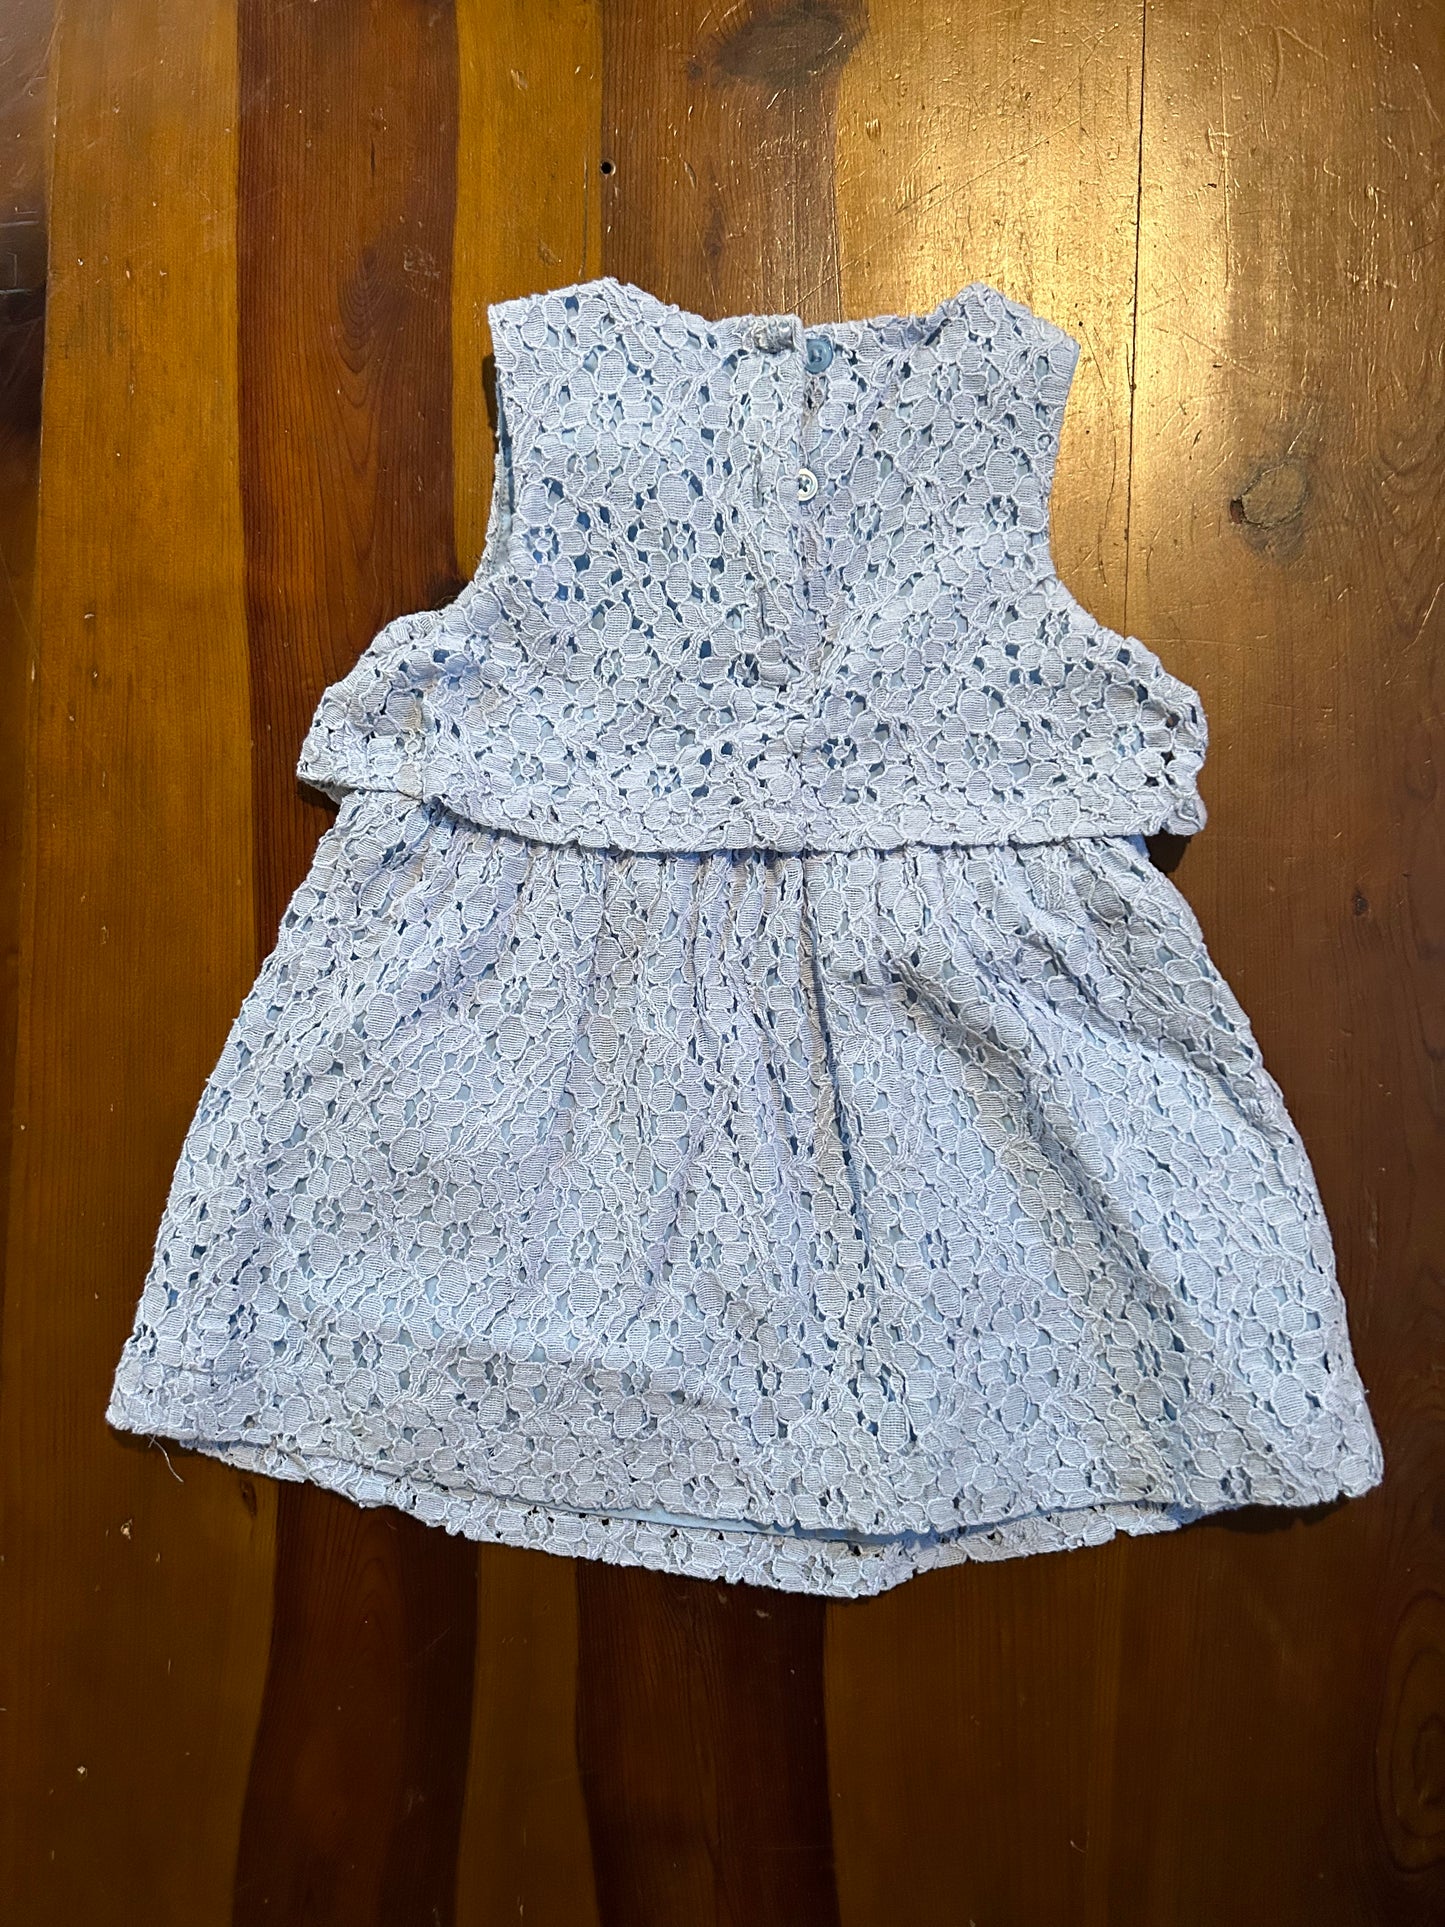 REDUCED Janie and Jack Girls Blue Lace Dress 12-18m